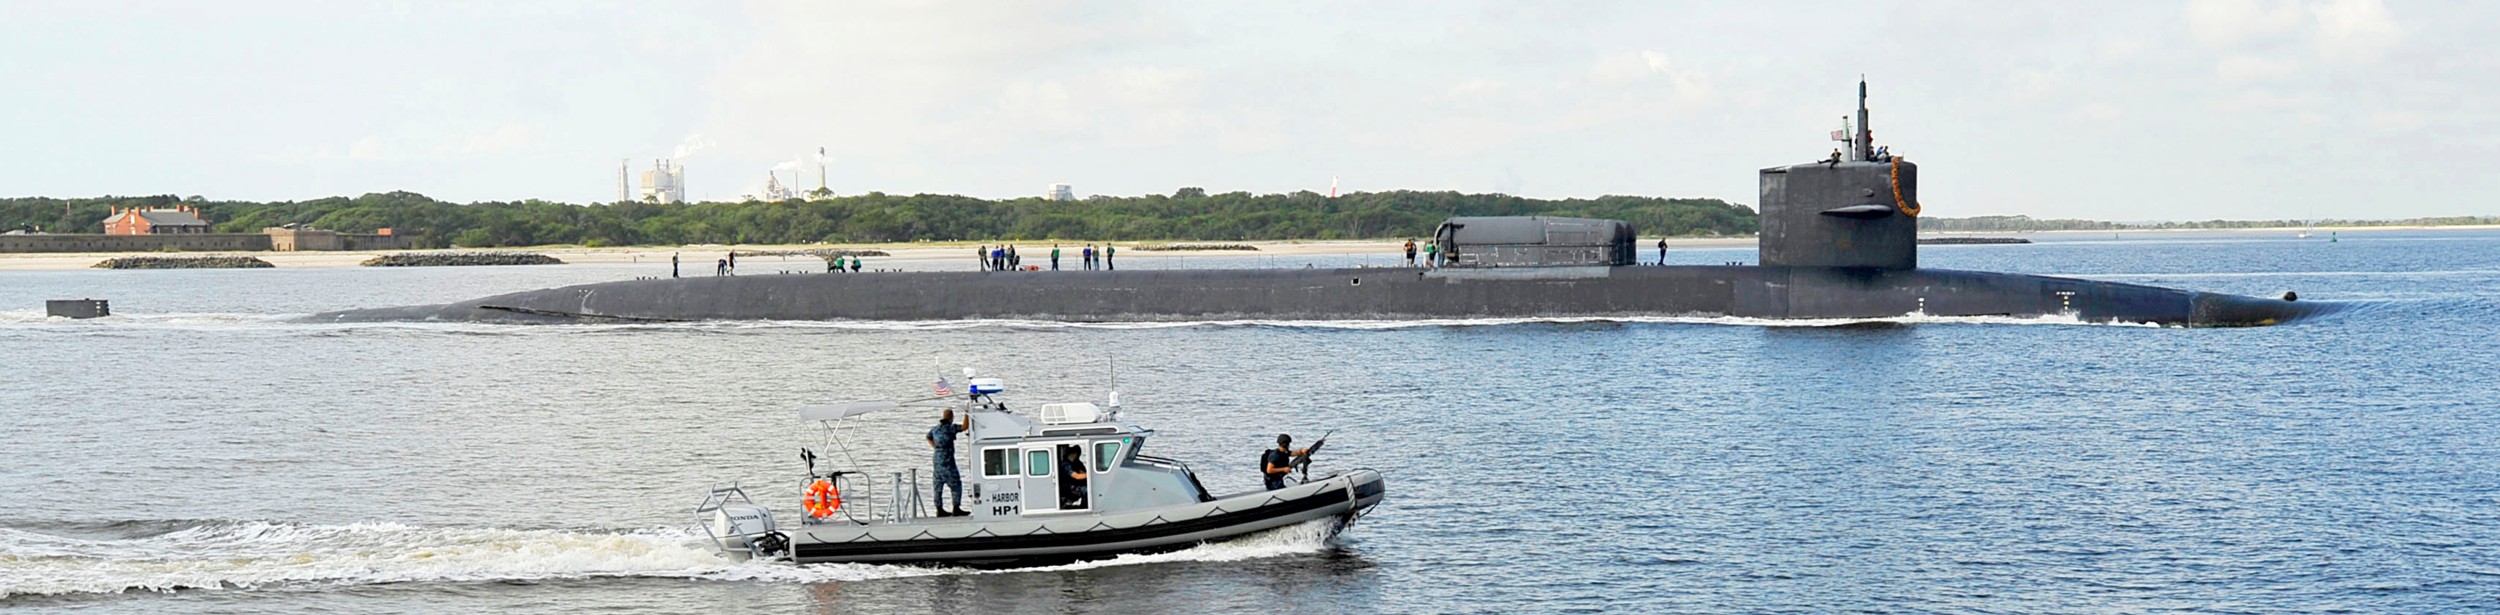 ssgn-728 uss florida guided missile submarine us navy 2013 11